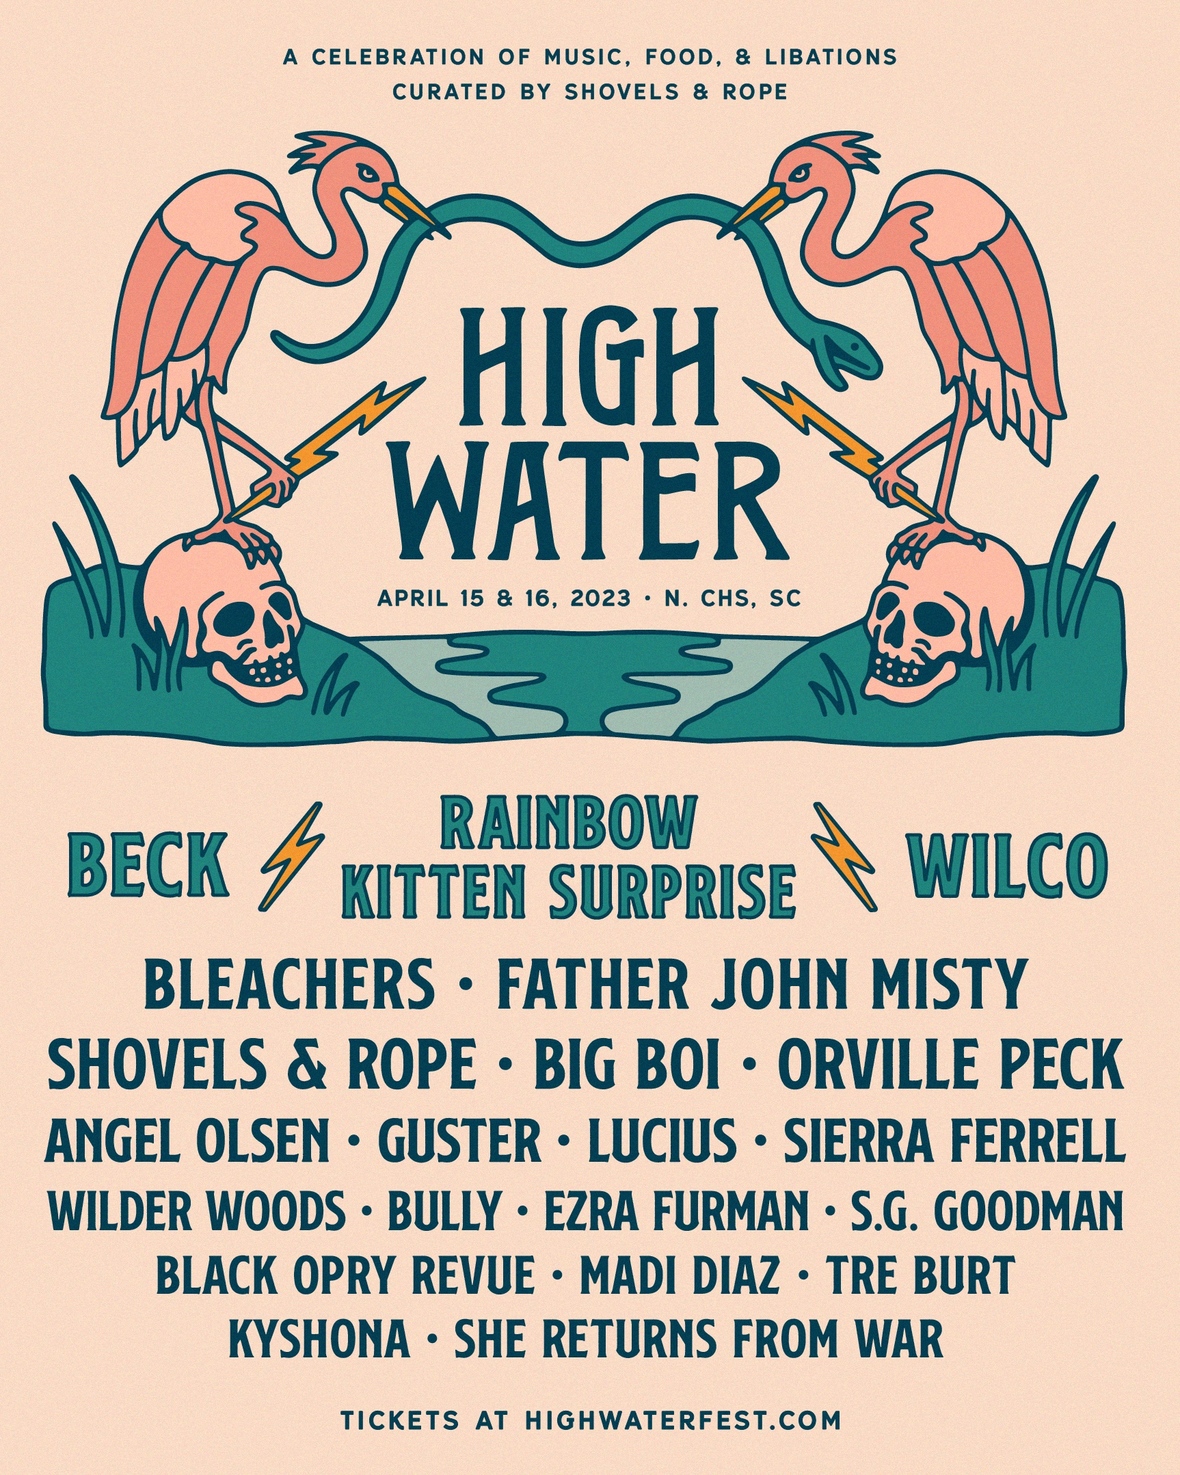 Something In The Water' festival reveals 2023 lineup